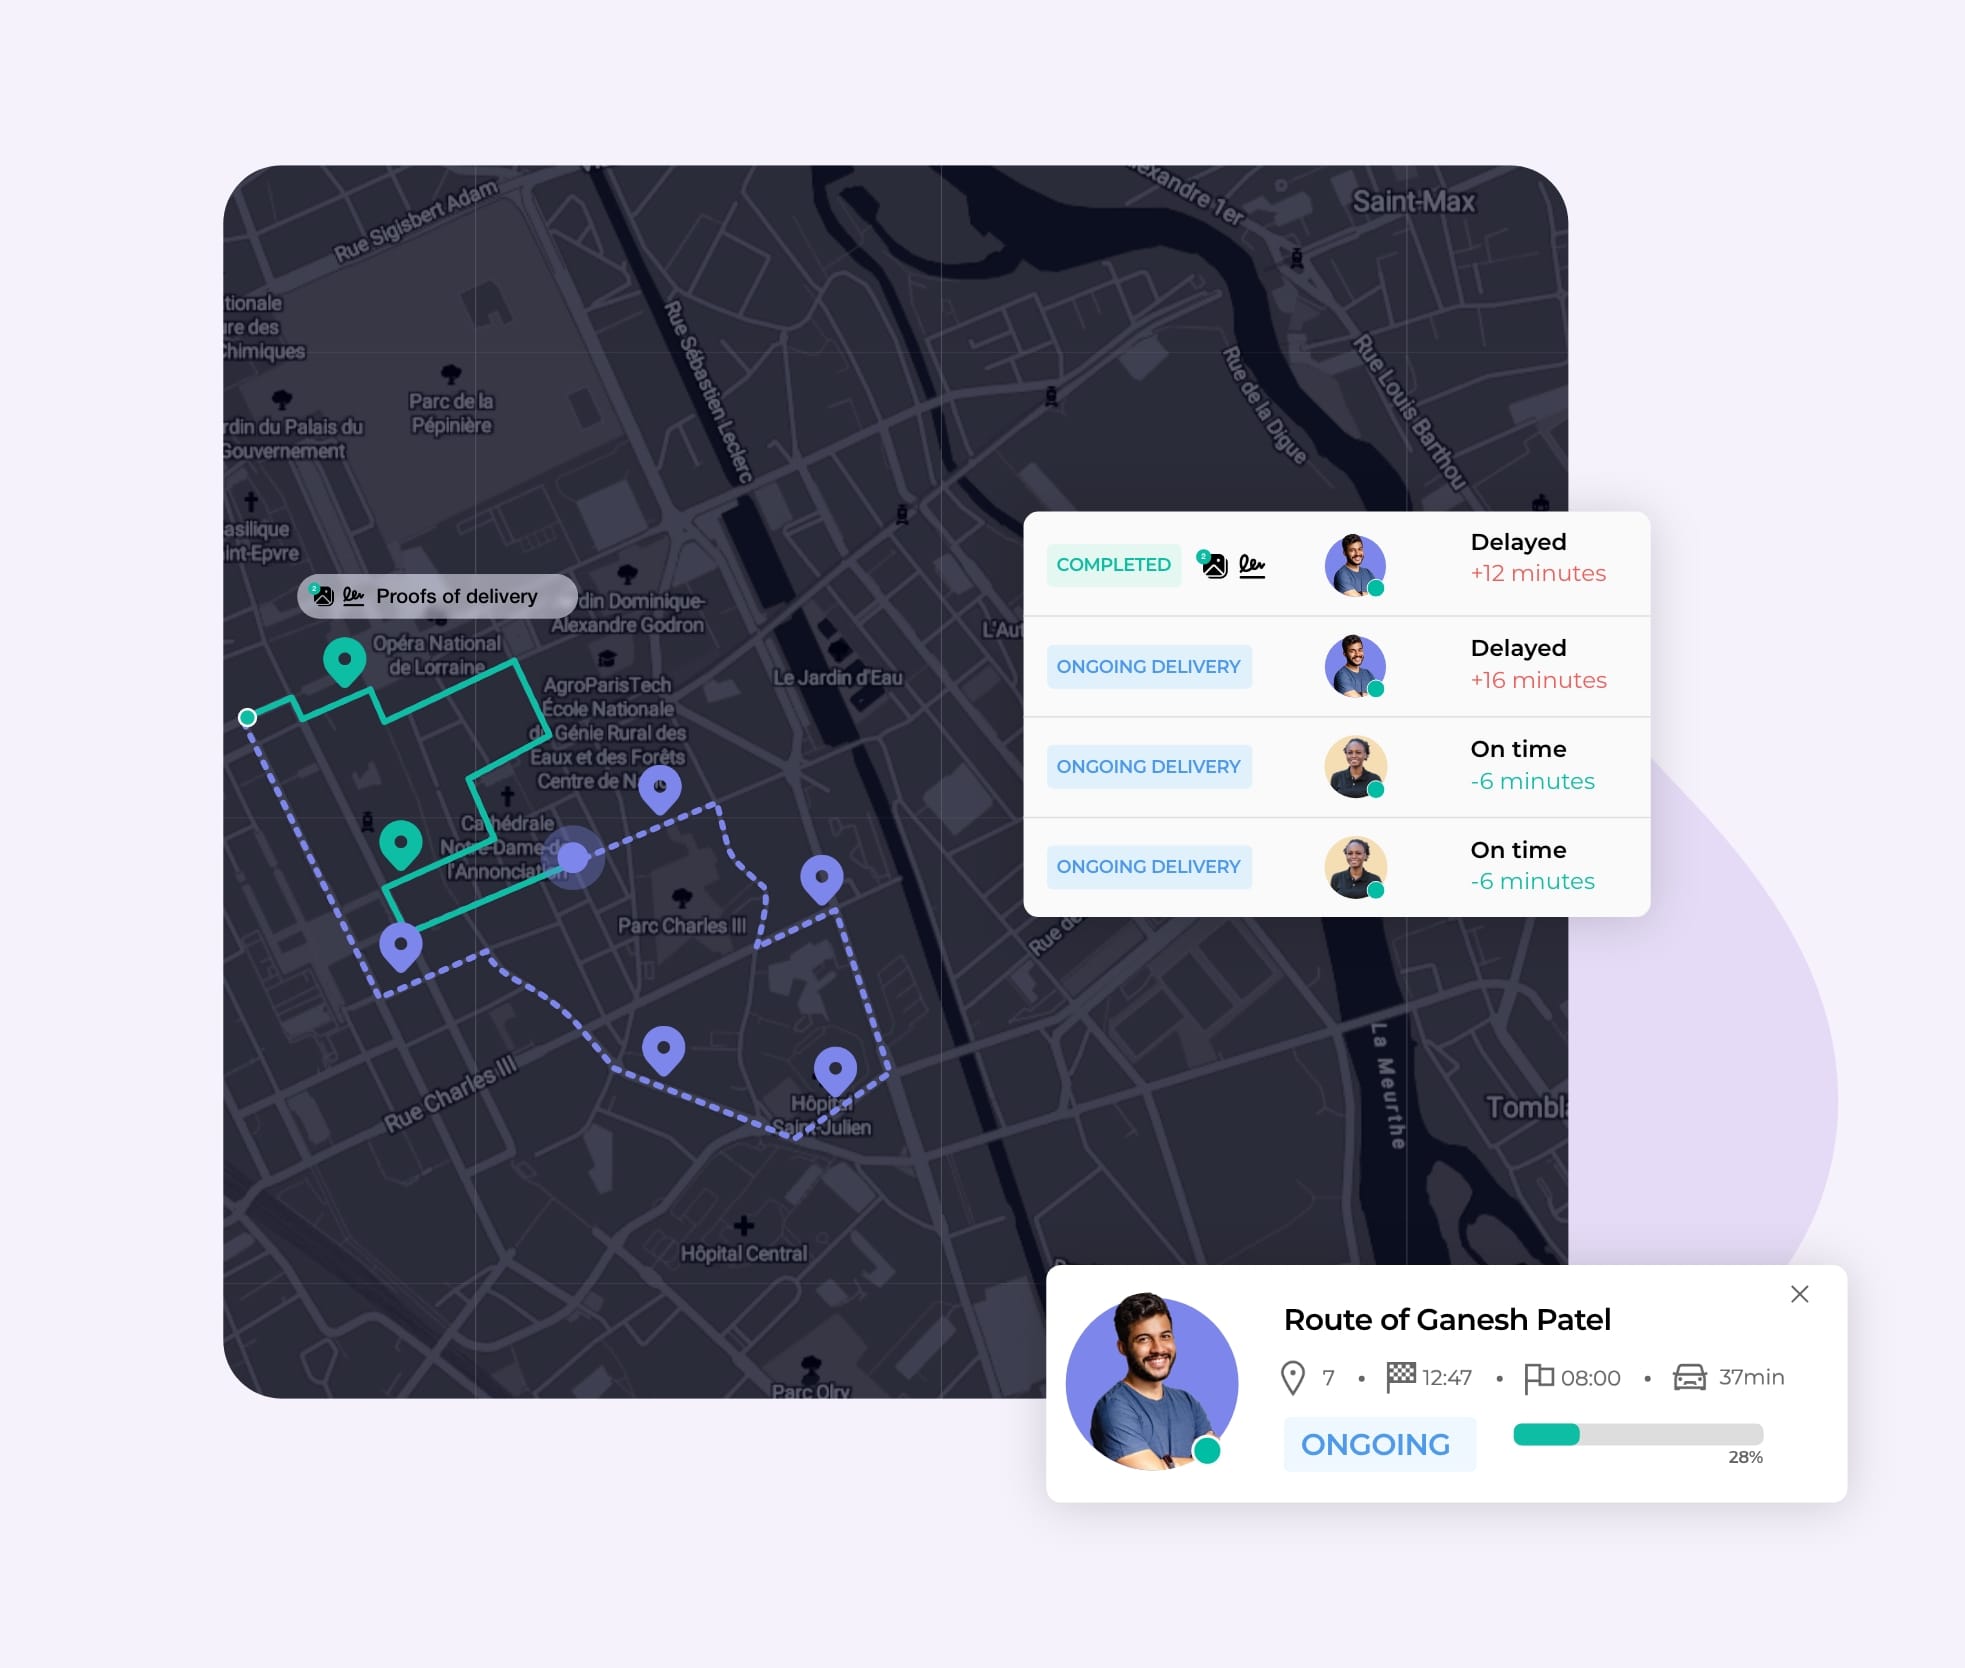 View of an AntsRoute user's activity with live delivery driver tracking. 